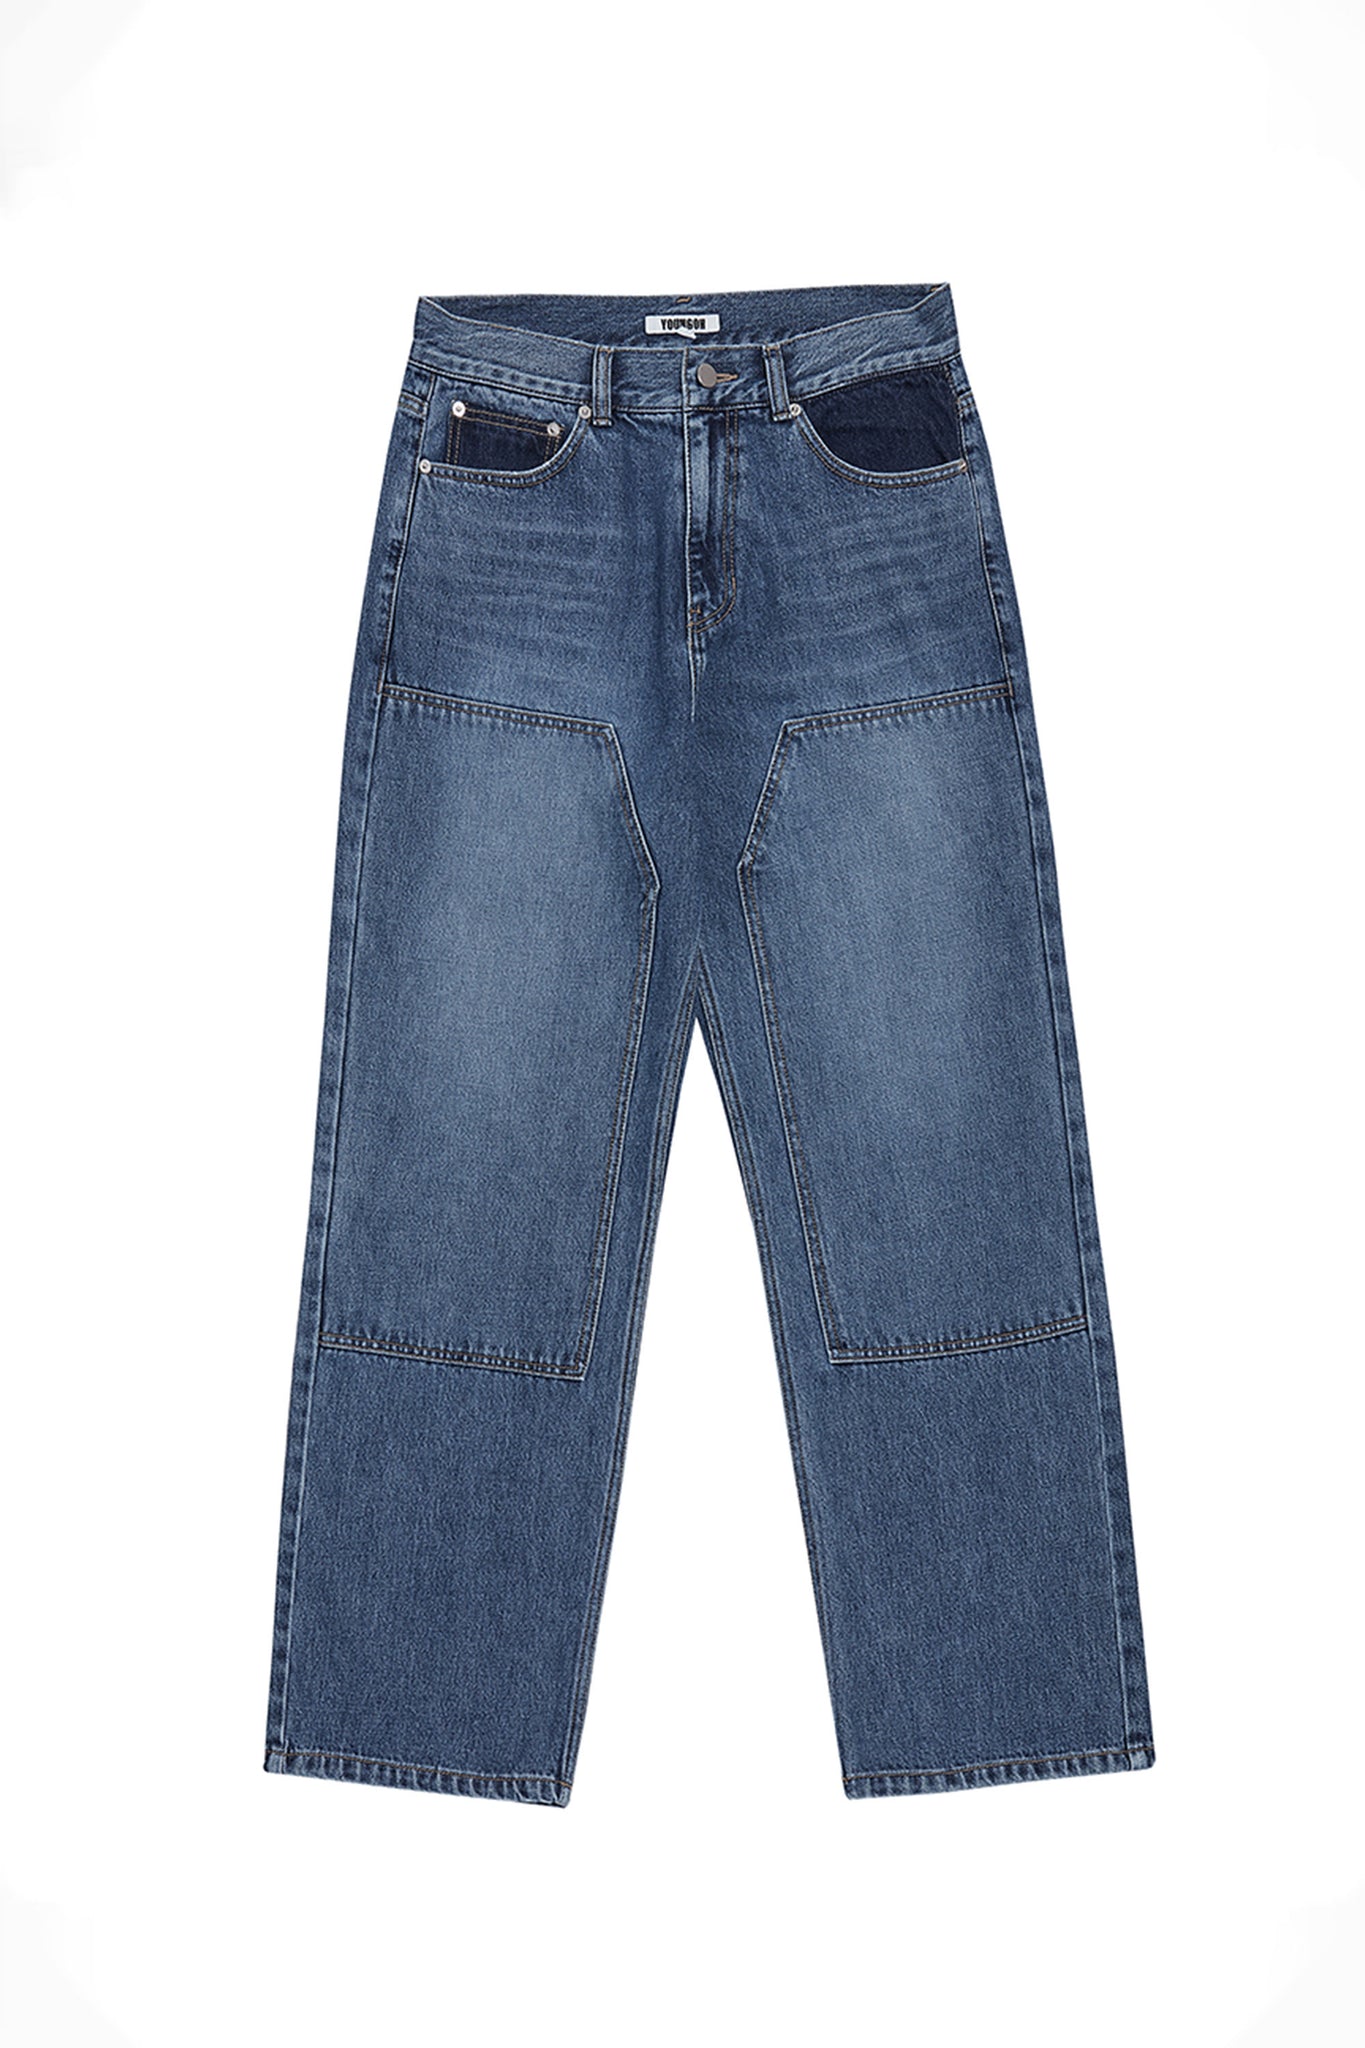 YOUNGOH PATCHED JEANS